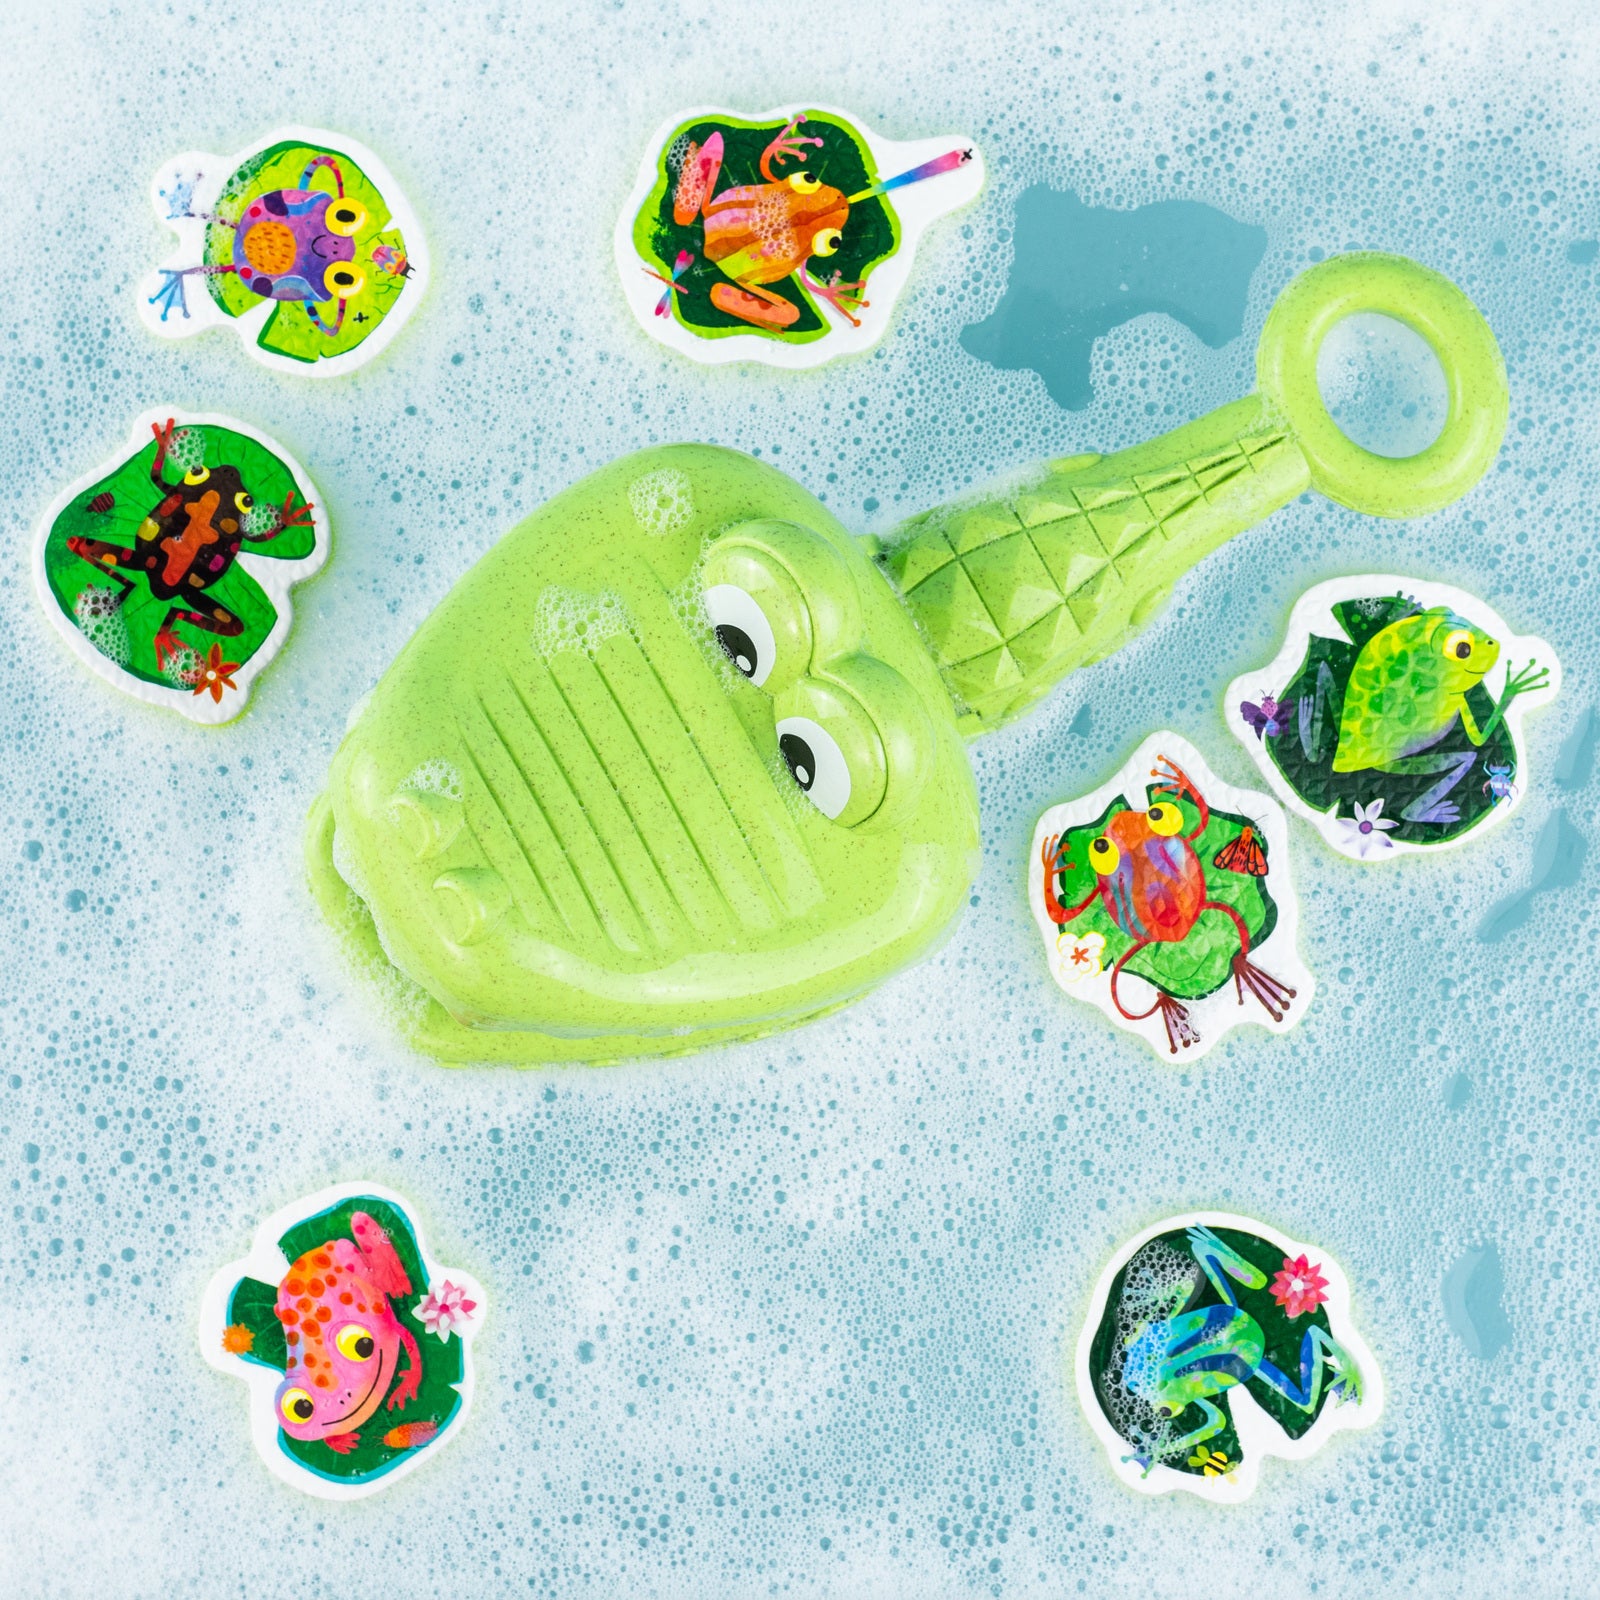 Tiger Tribe Bath Toy Croc Chasey - Catch A Frog